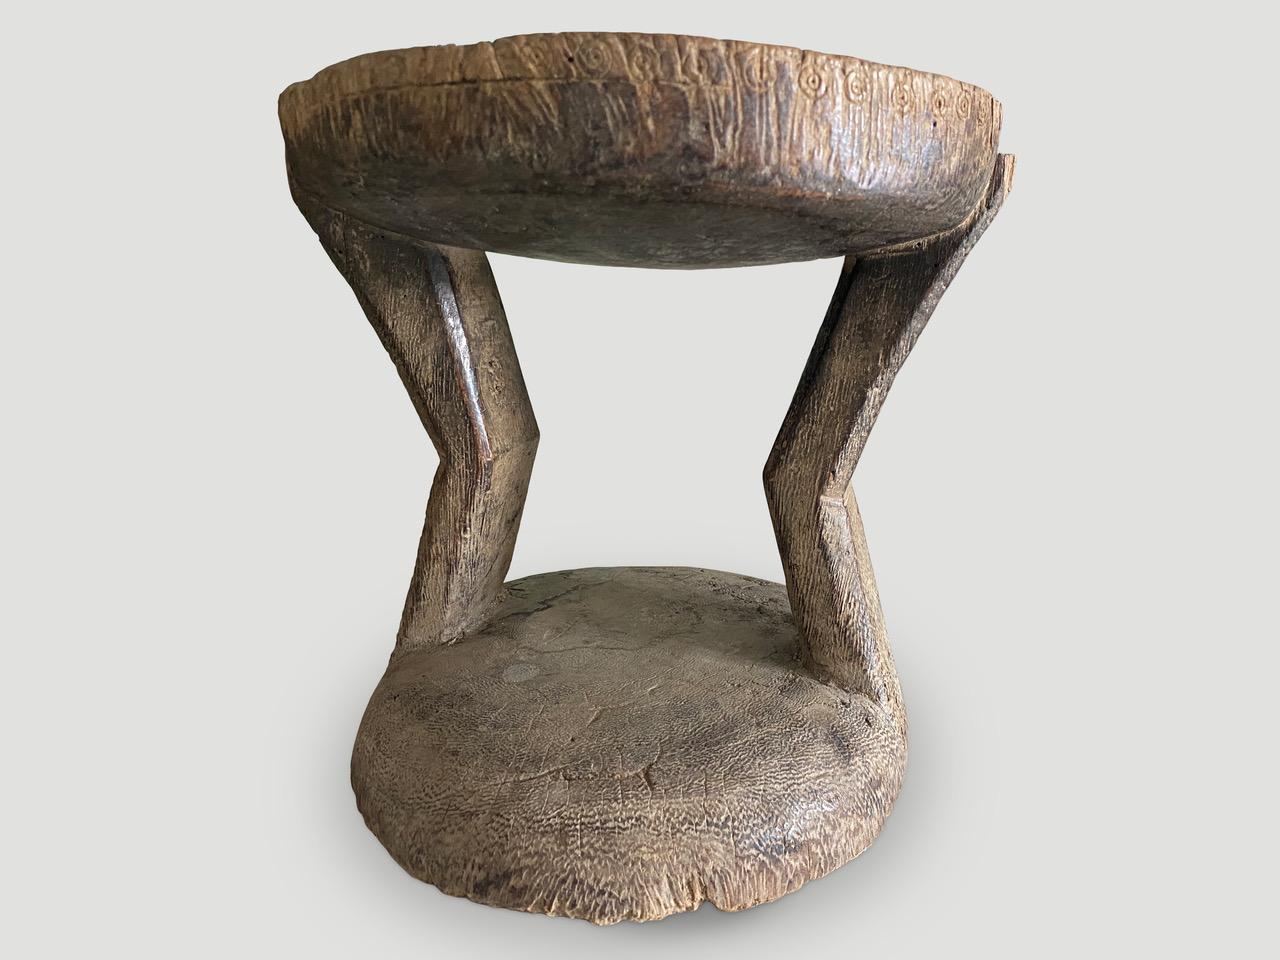 Beautiful hand carved African side table or stool with lovely patina and added tin appliqué on the top The entire piece is hand carved out of a single block of wood. A beautiful, versatile item that is both sculptural and usable

This stool or